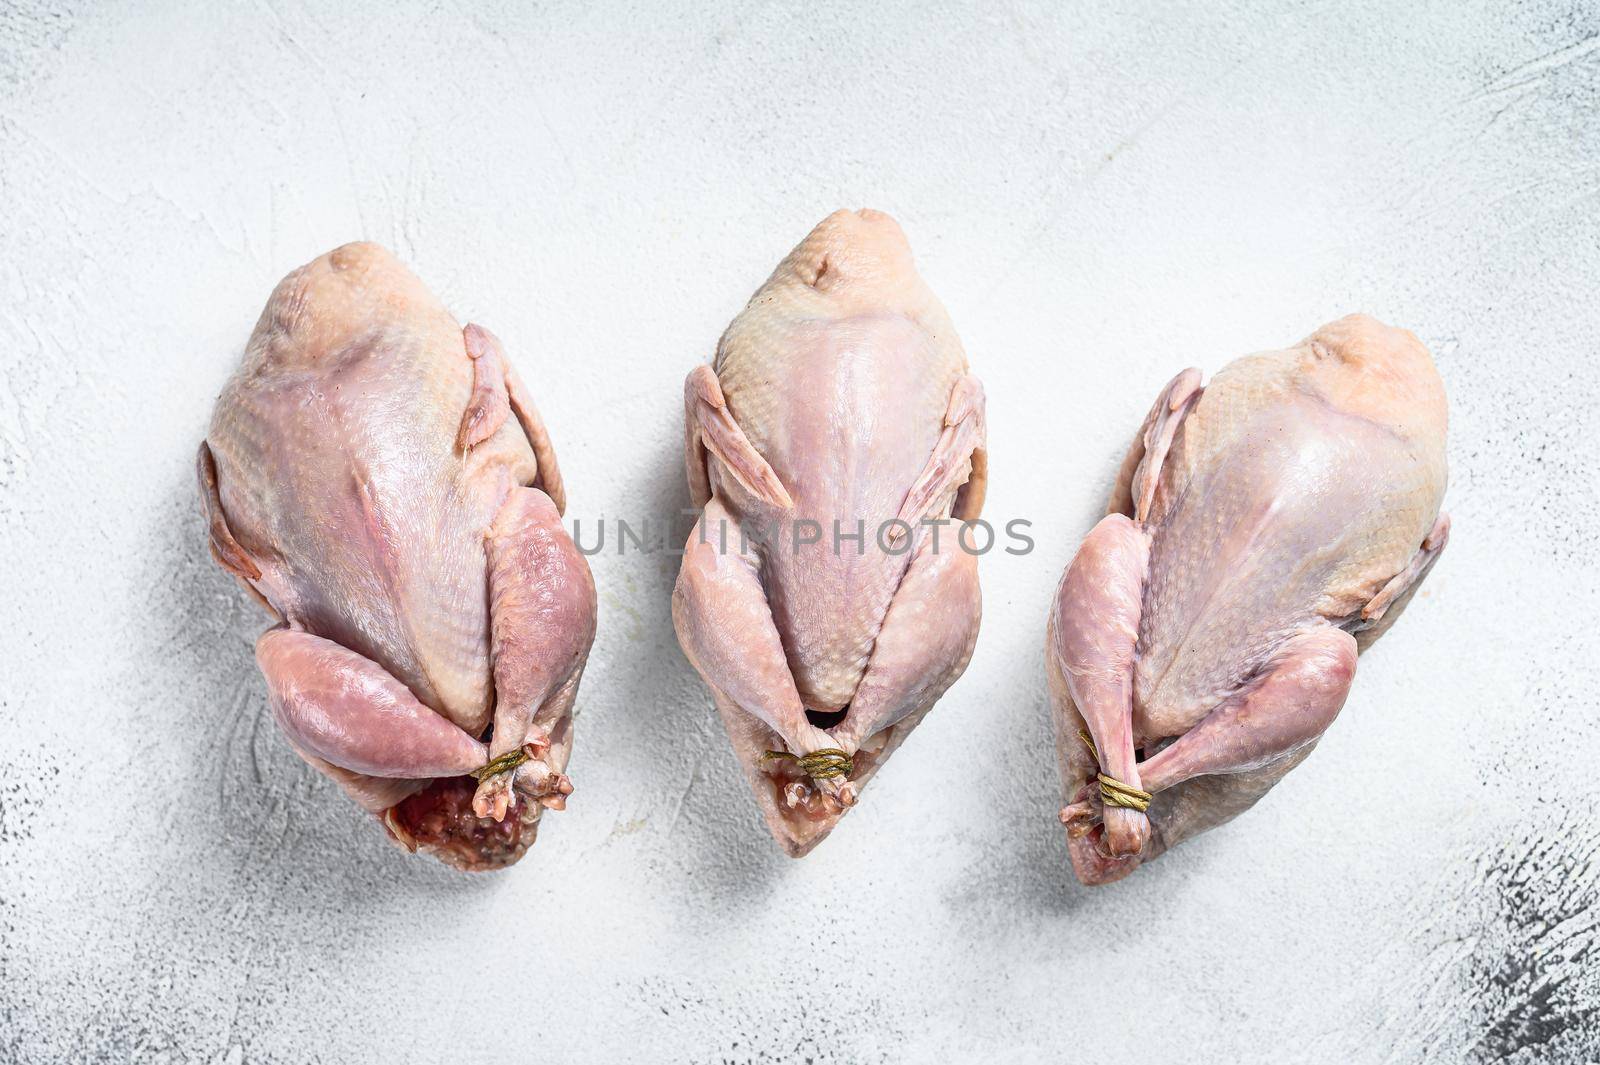 Raw quails on a kitchen table. White background. Top view.